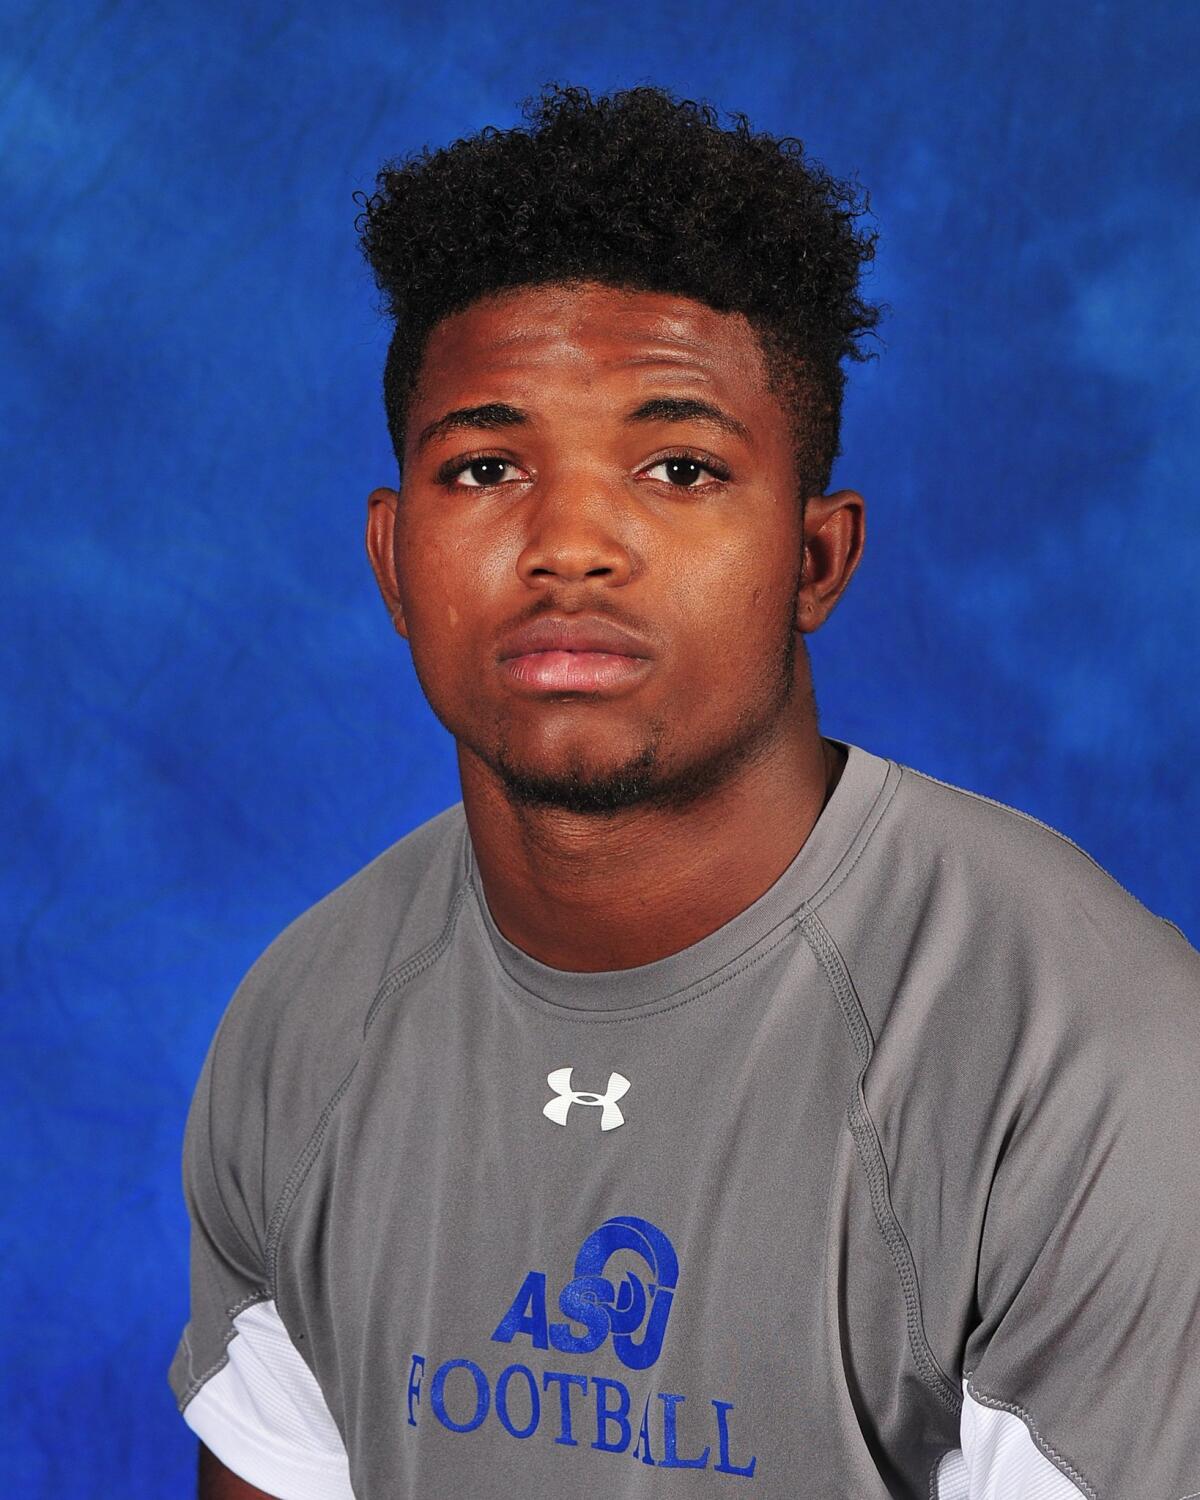 Christian Taylor was killed during a suspected burglary in Texas. (Angelo State University via AP)